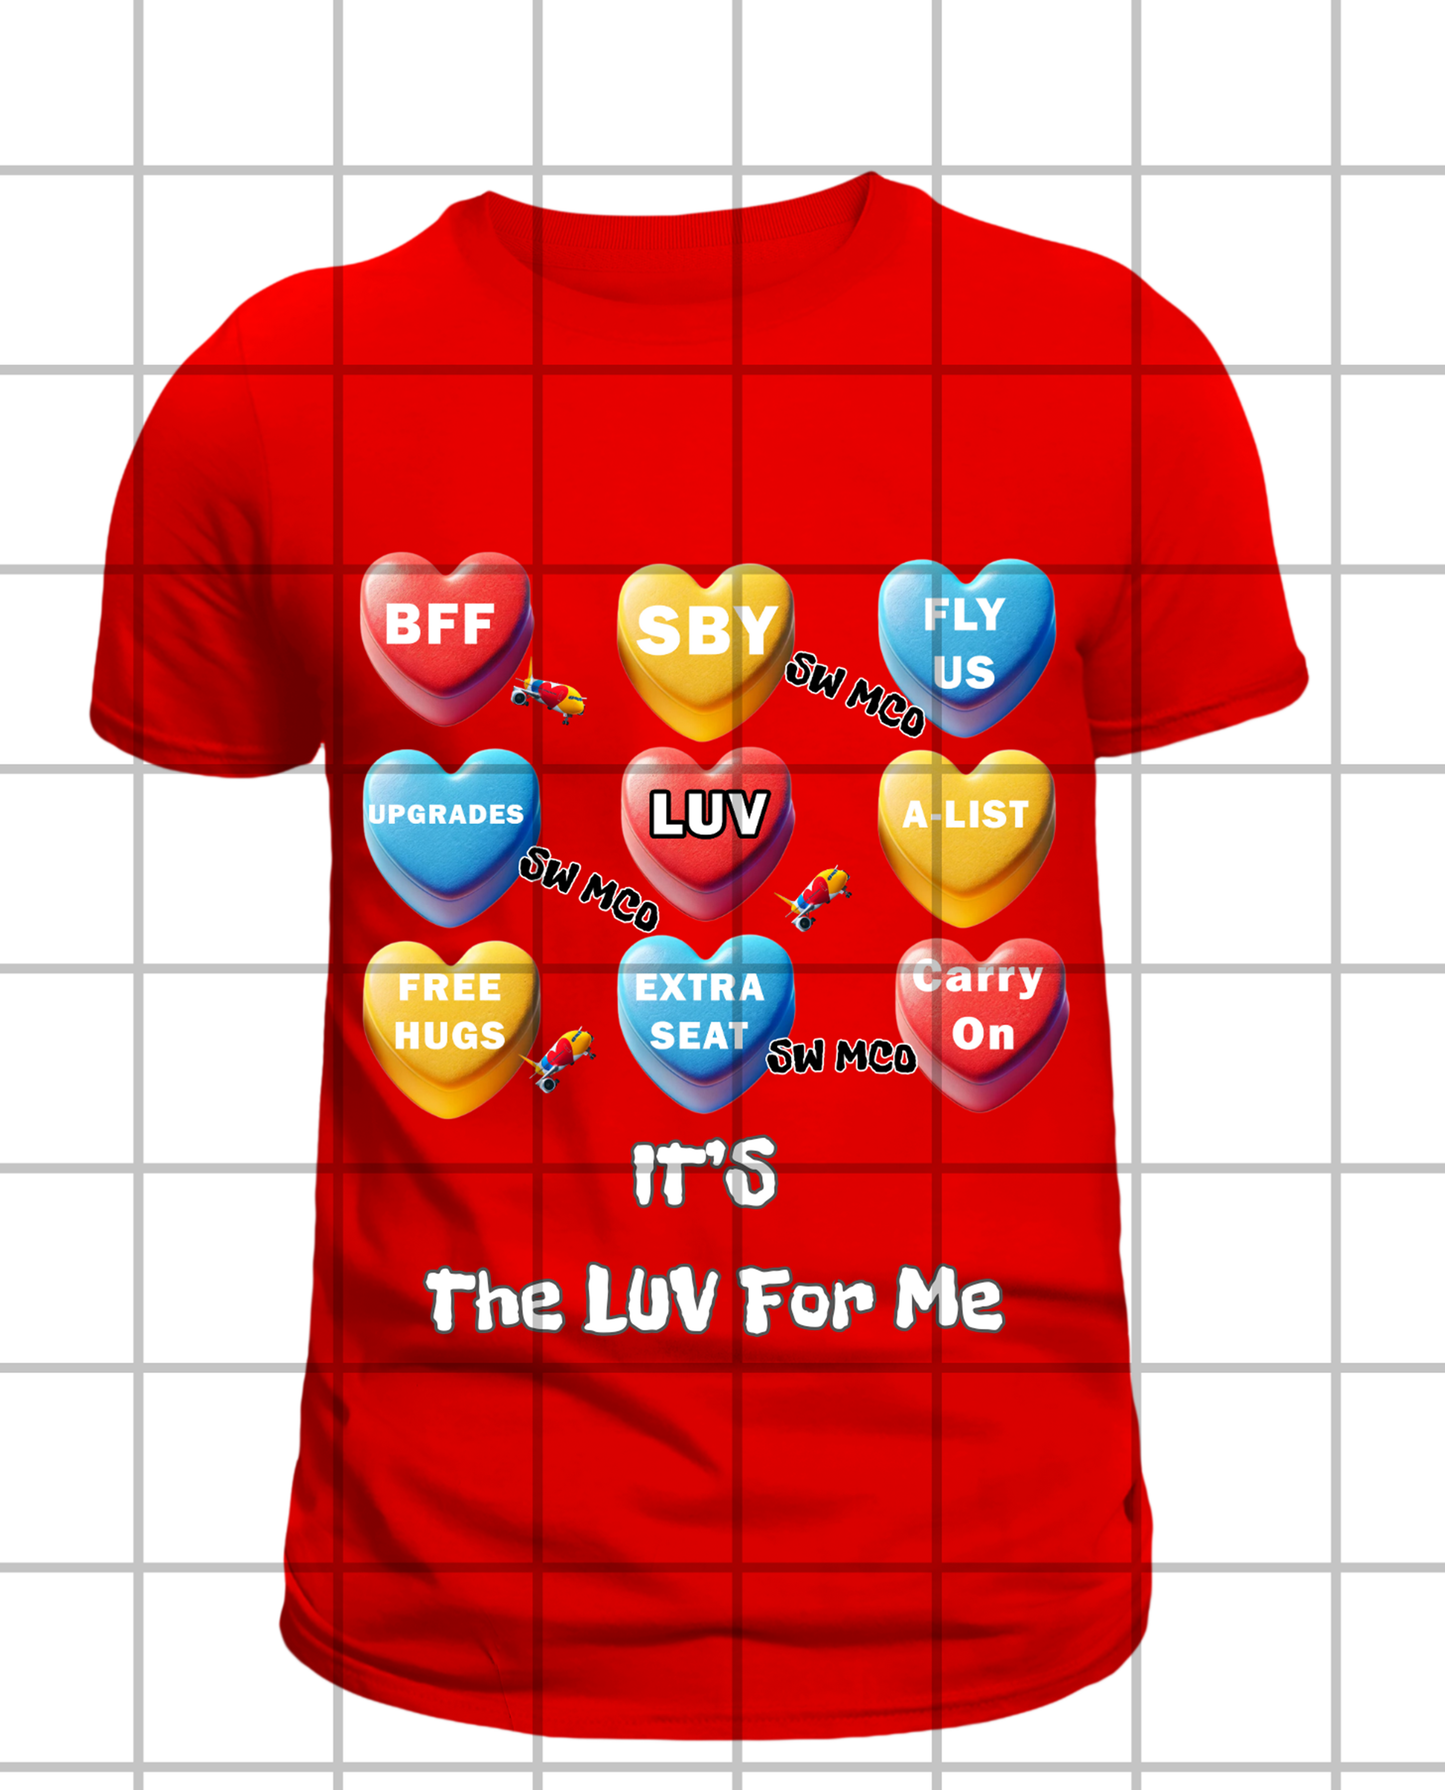 SW It's The LUV For Me (T-shirts)